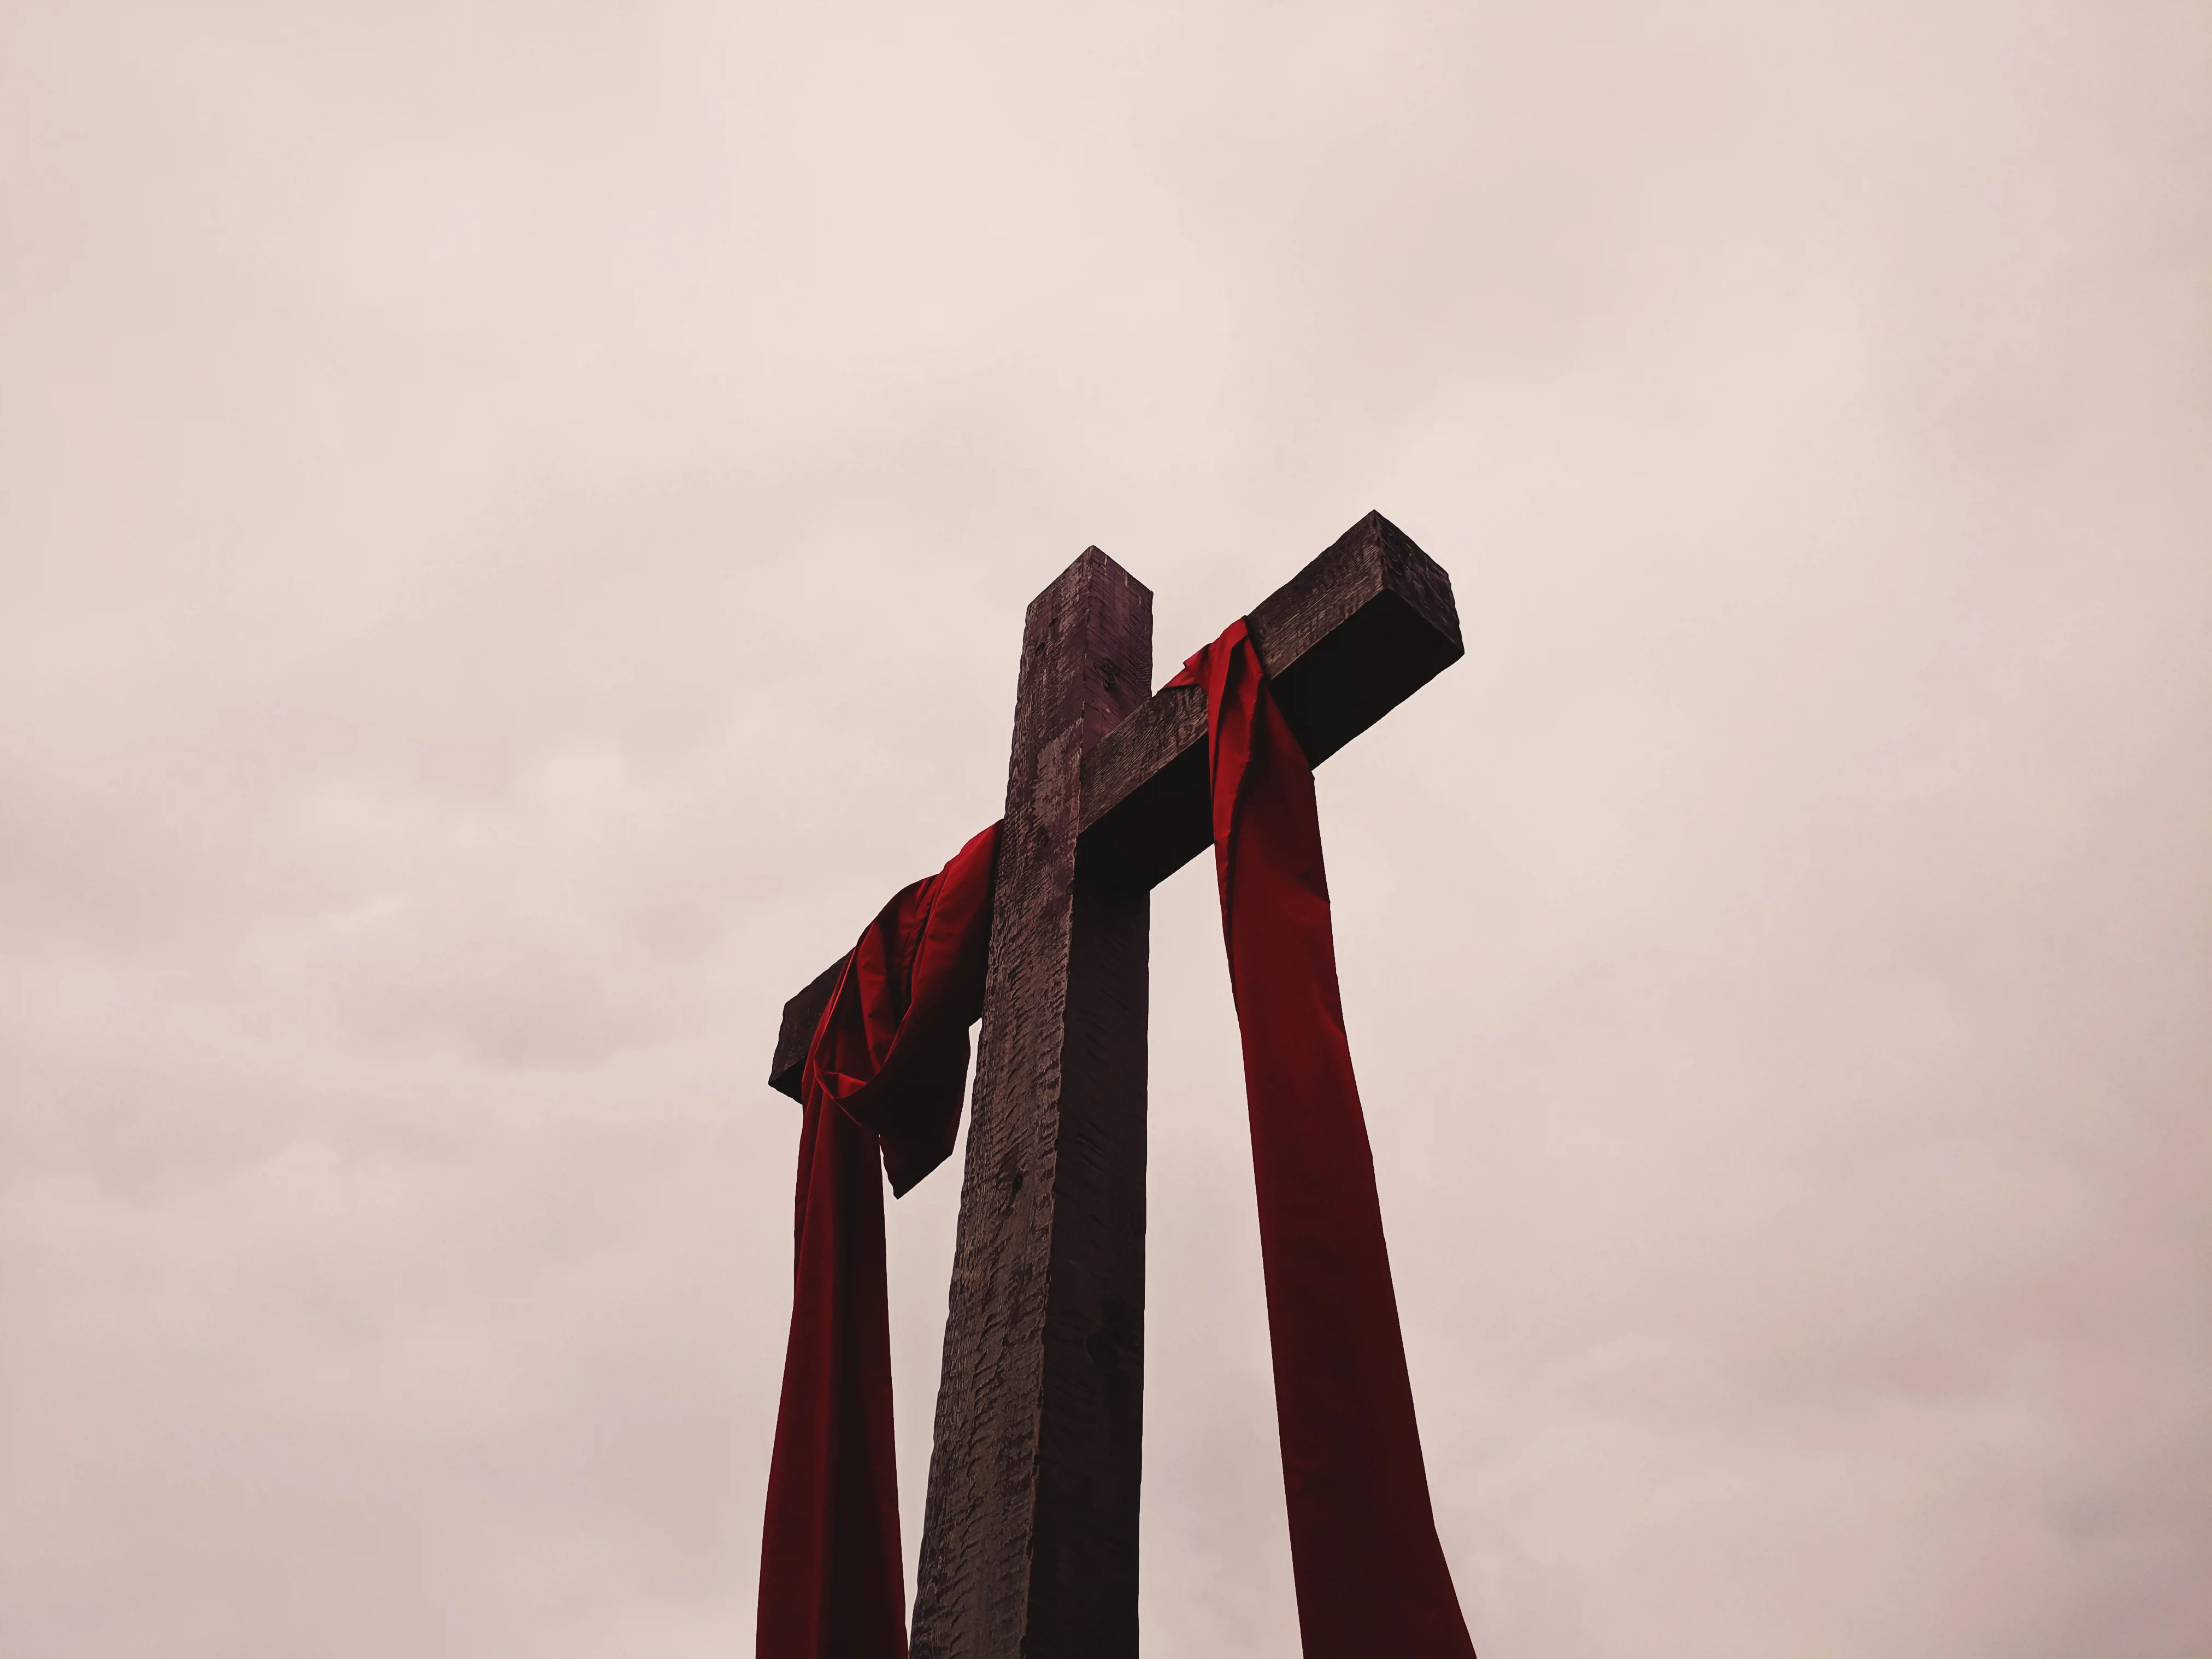 A wooden cross with a red cloth draped over it.